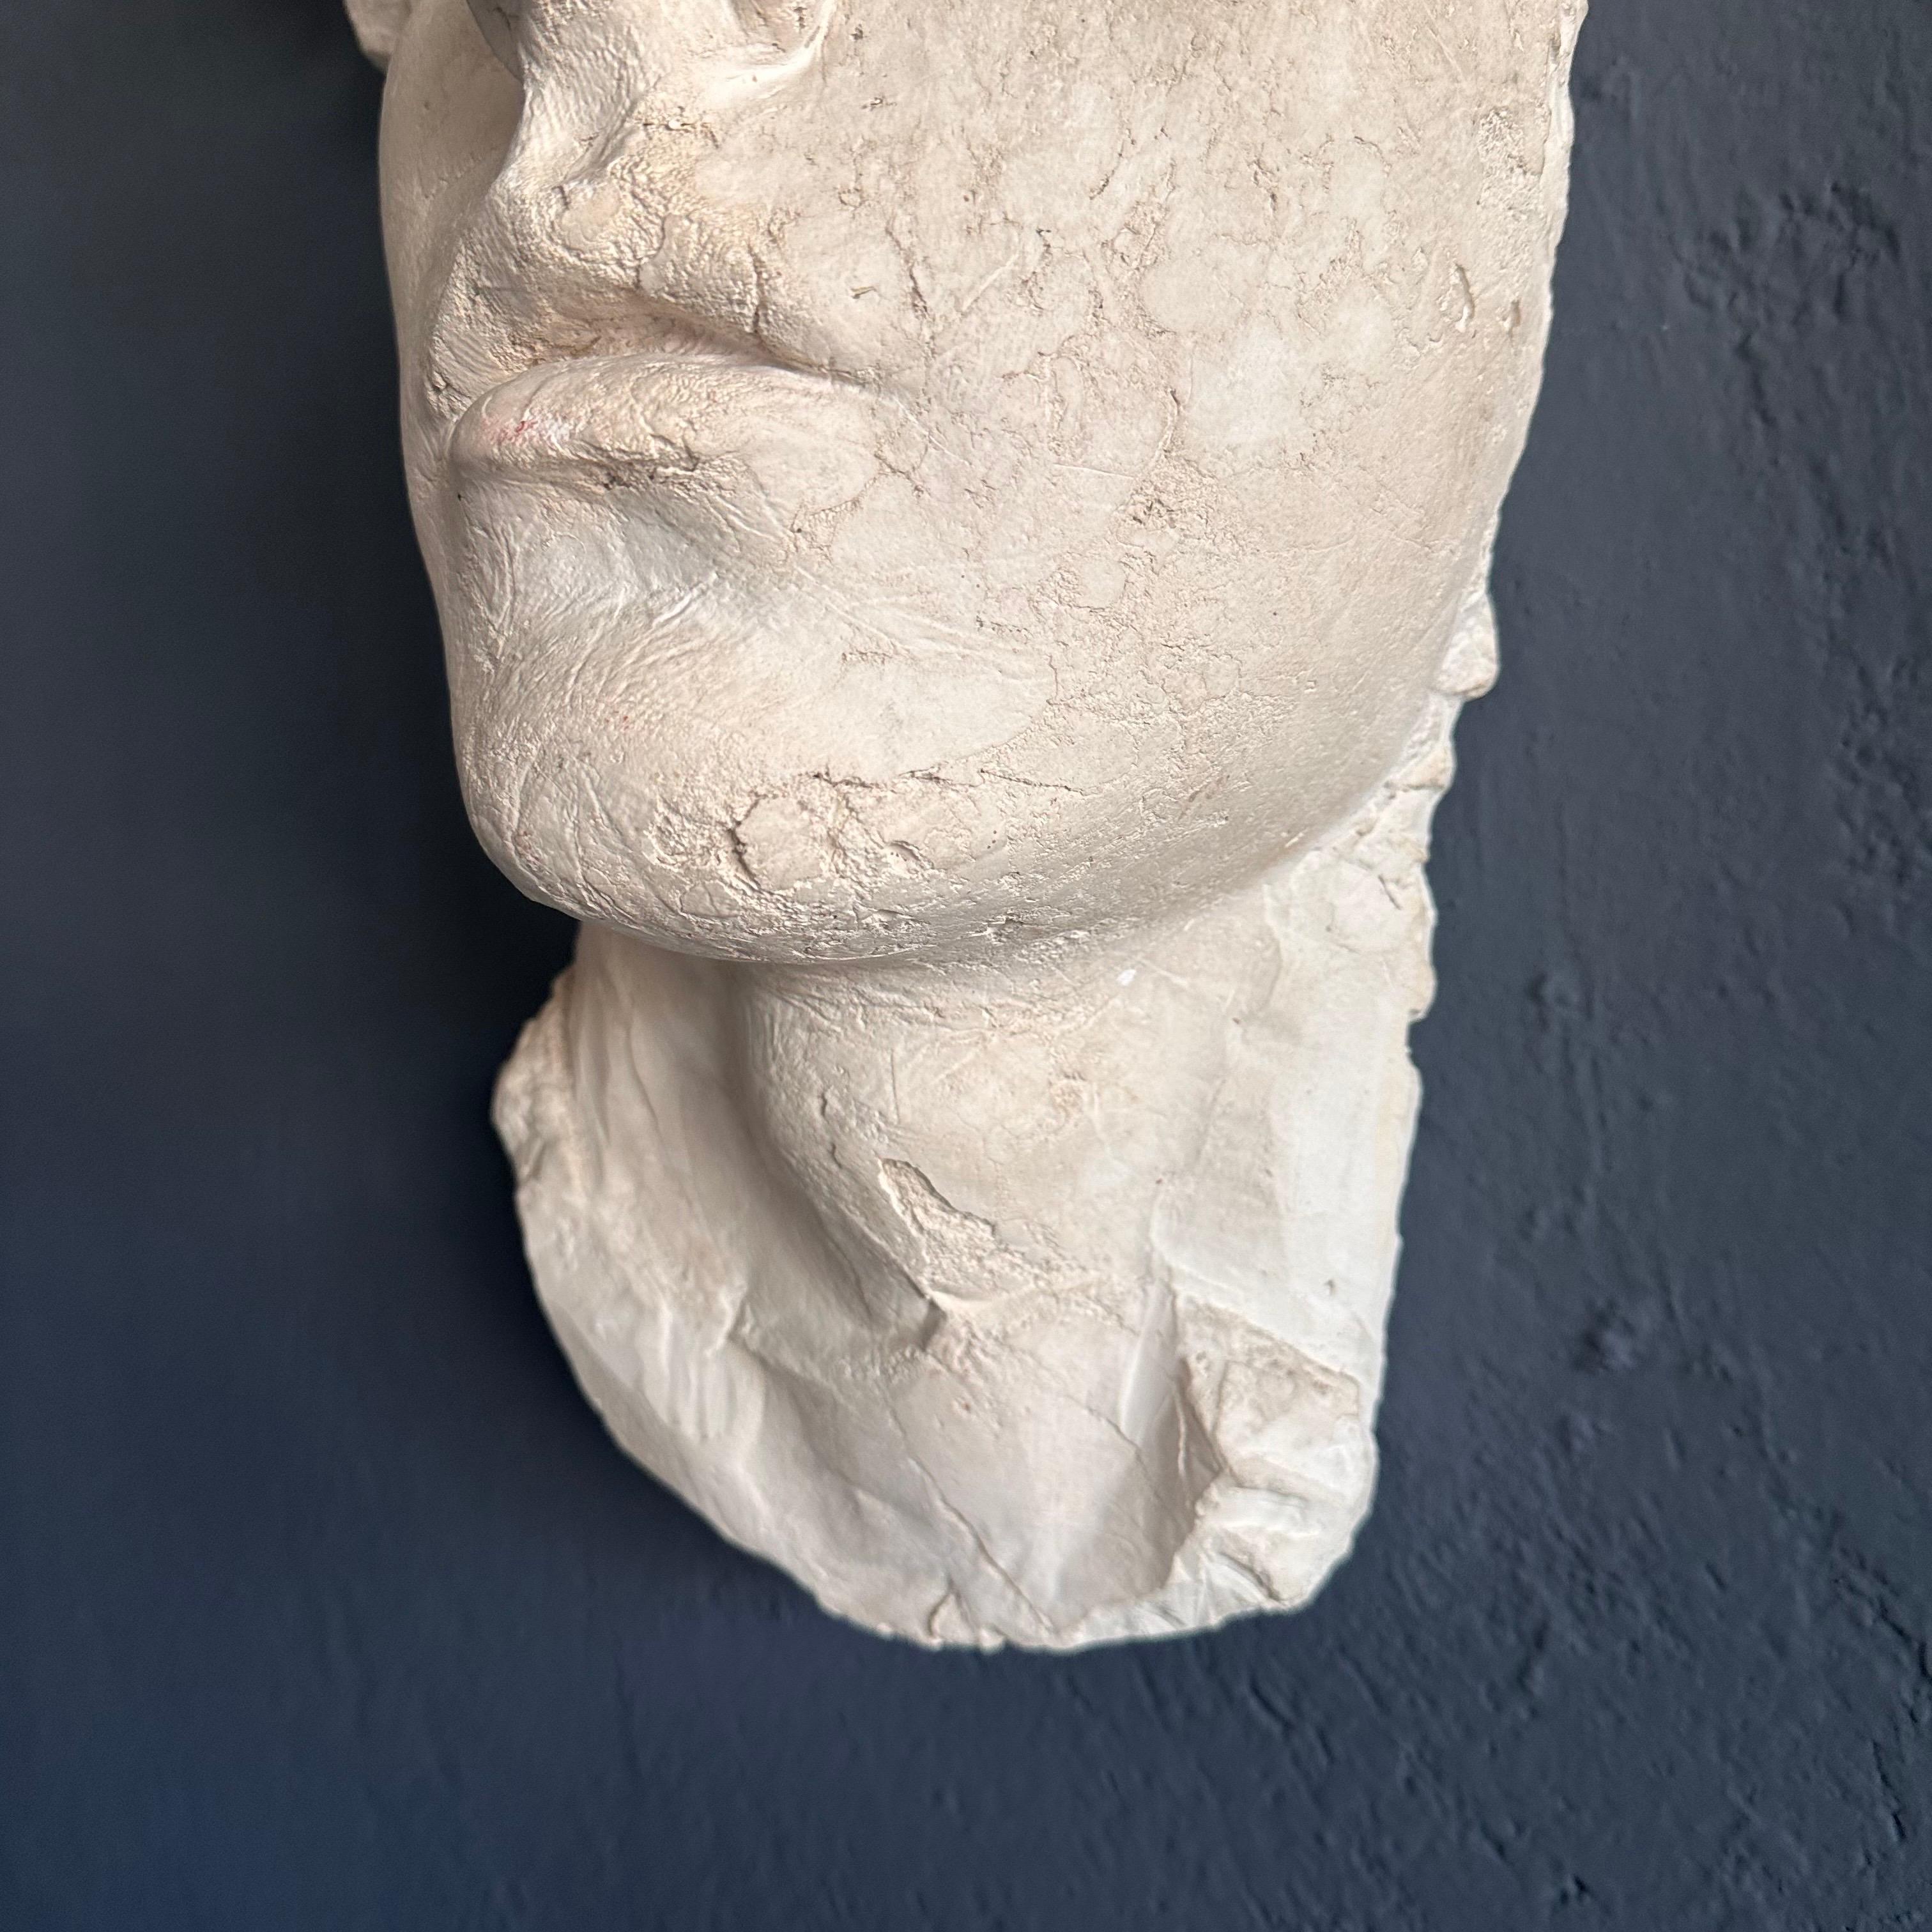 Plaster Stunning Decorative Roman Gypsum Face, 1970s Reproduction For Sale